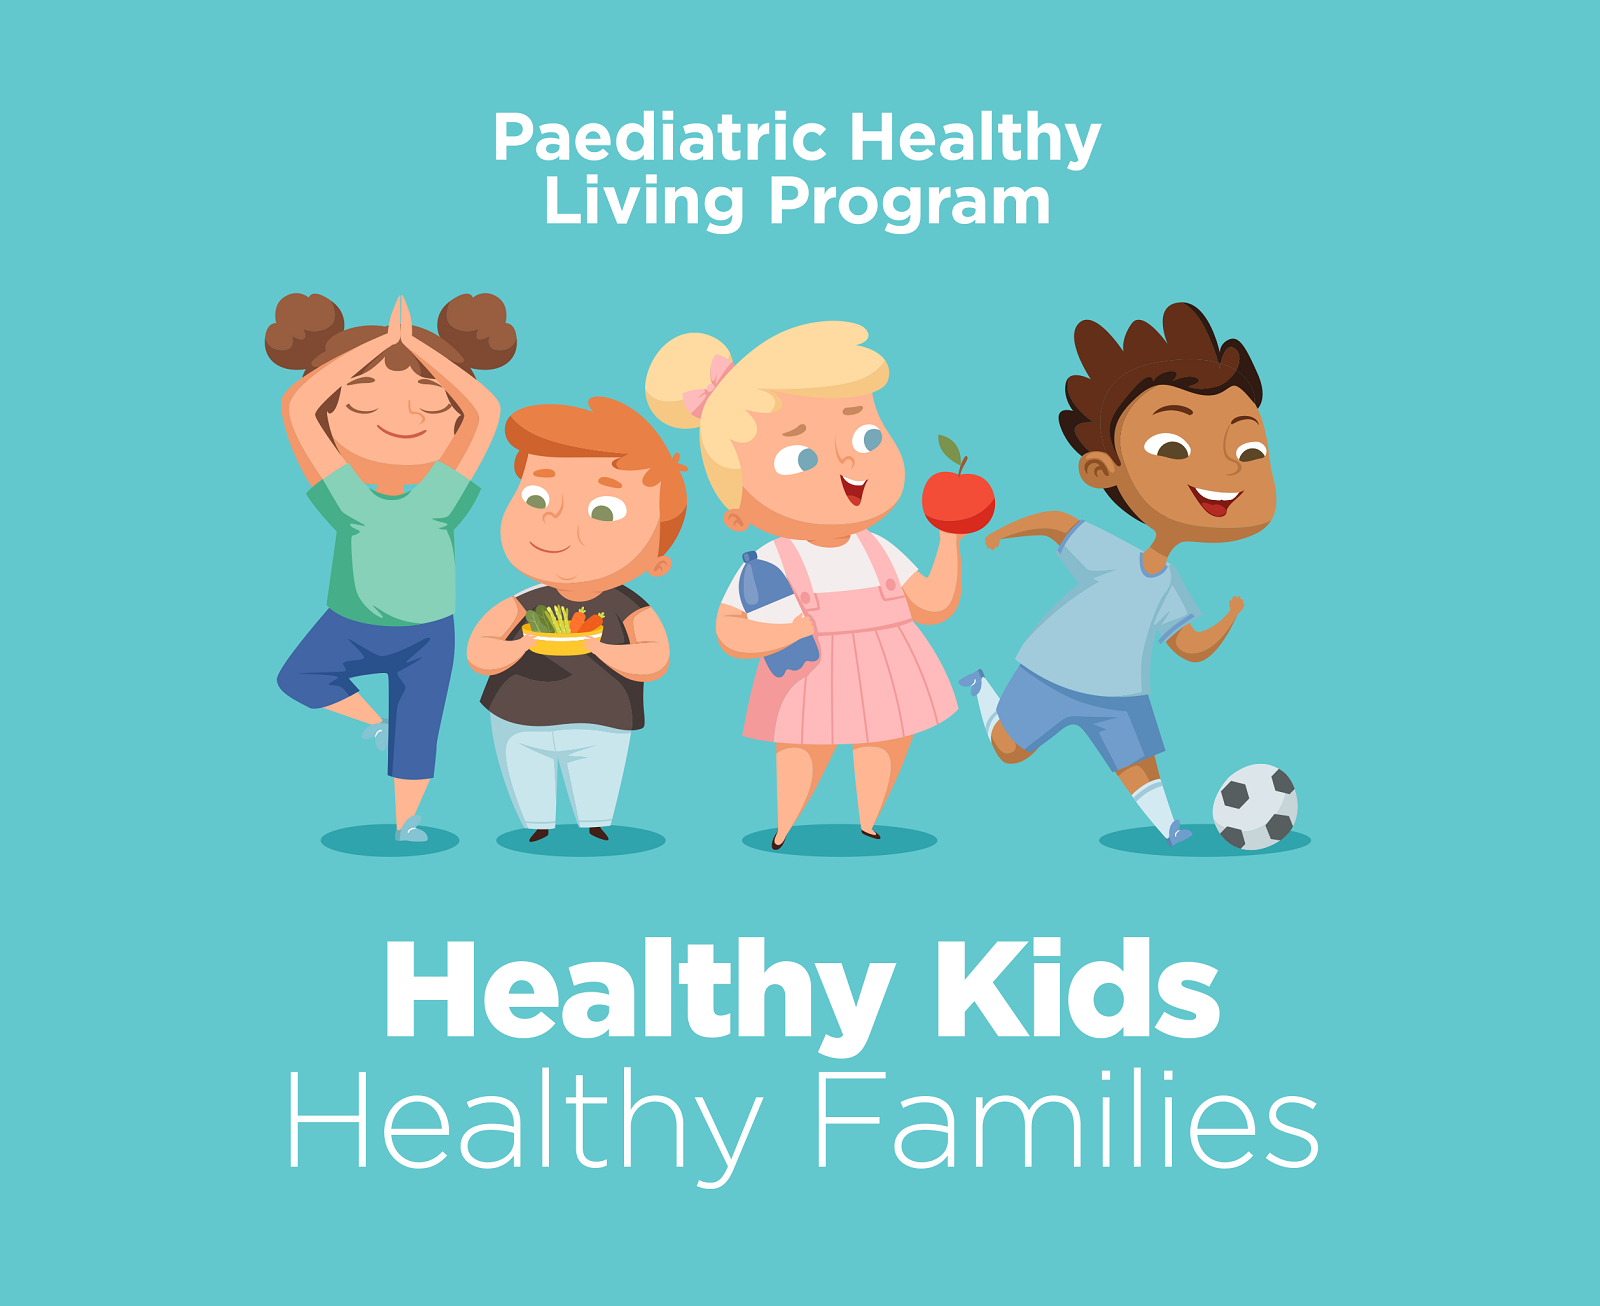 What is the Paediatric Healthy Living Program?